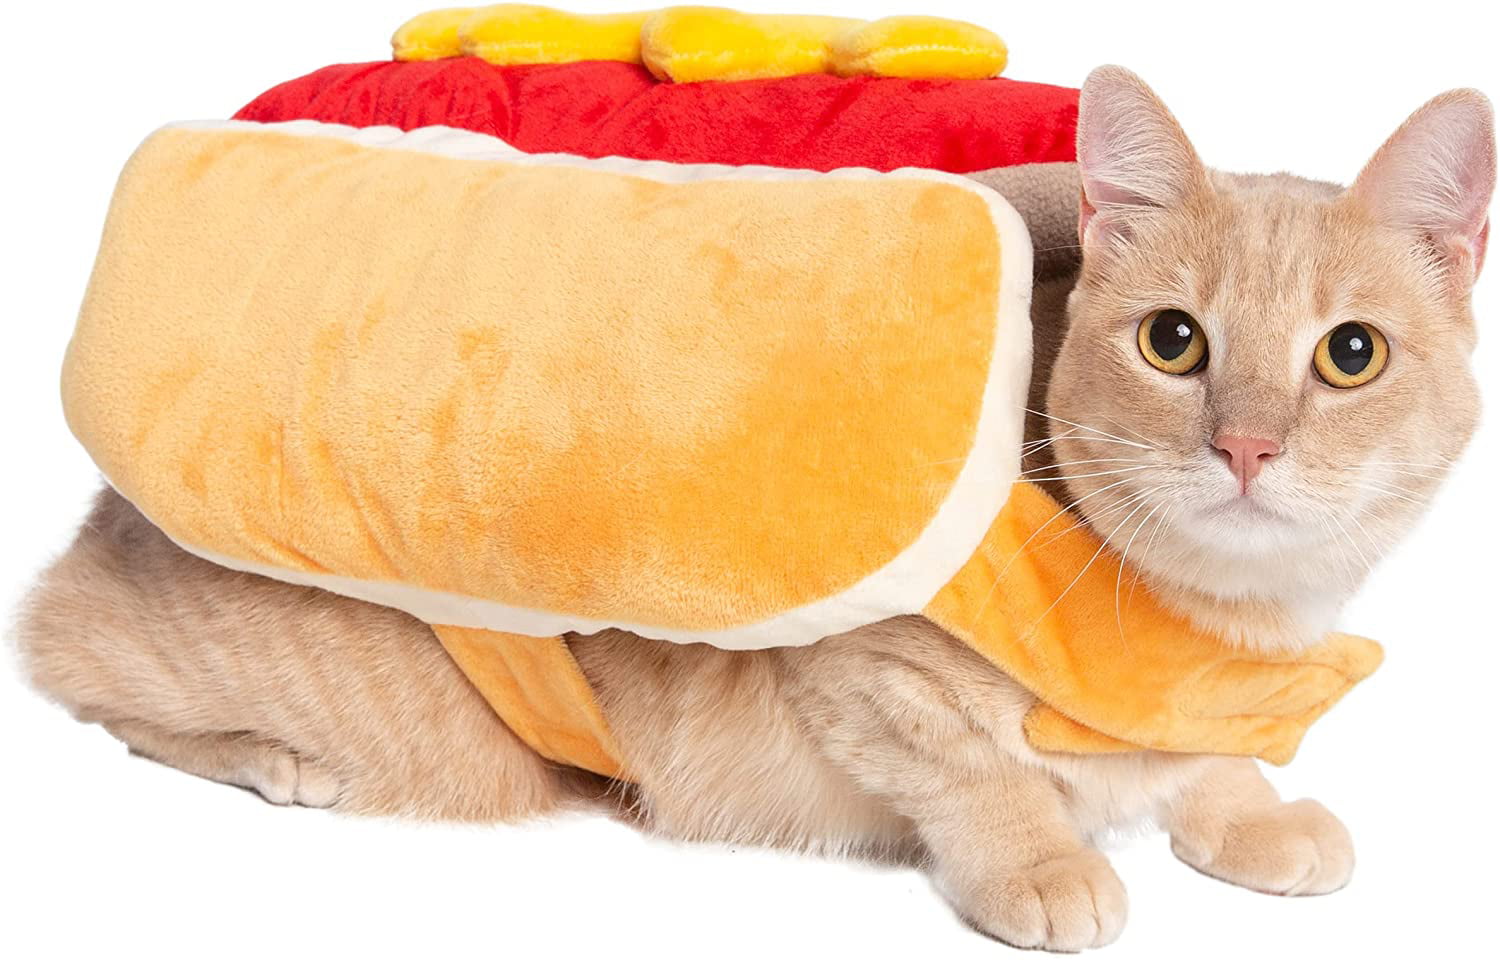 Pet Krewe Hot Dog Costume for Cats and Dogs, Medium Pet Wiener Costume for Dogs  1st Birthday, National Cat Day & Celebrations